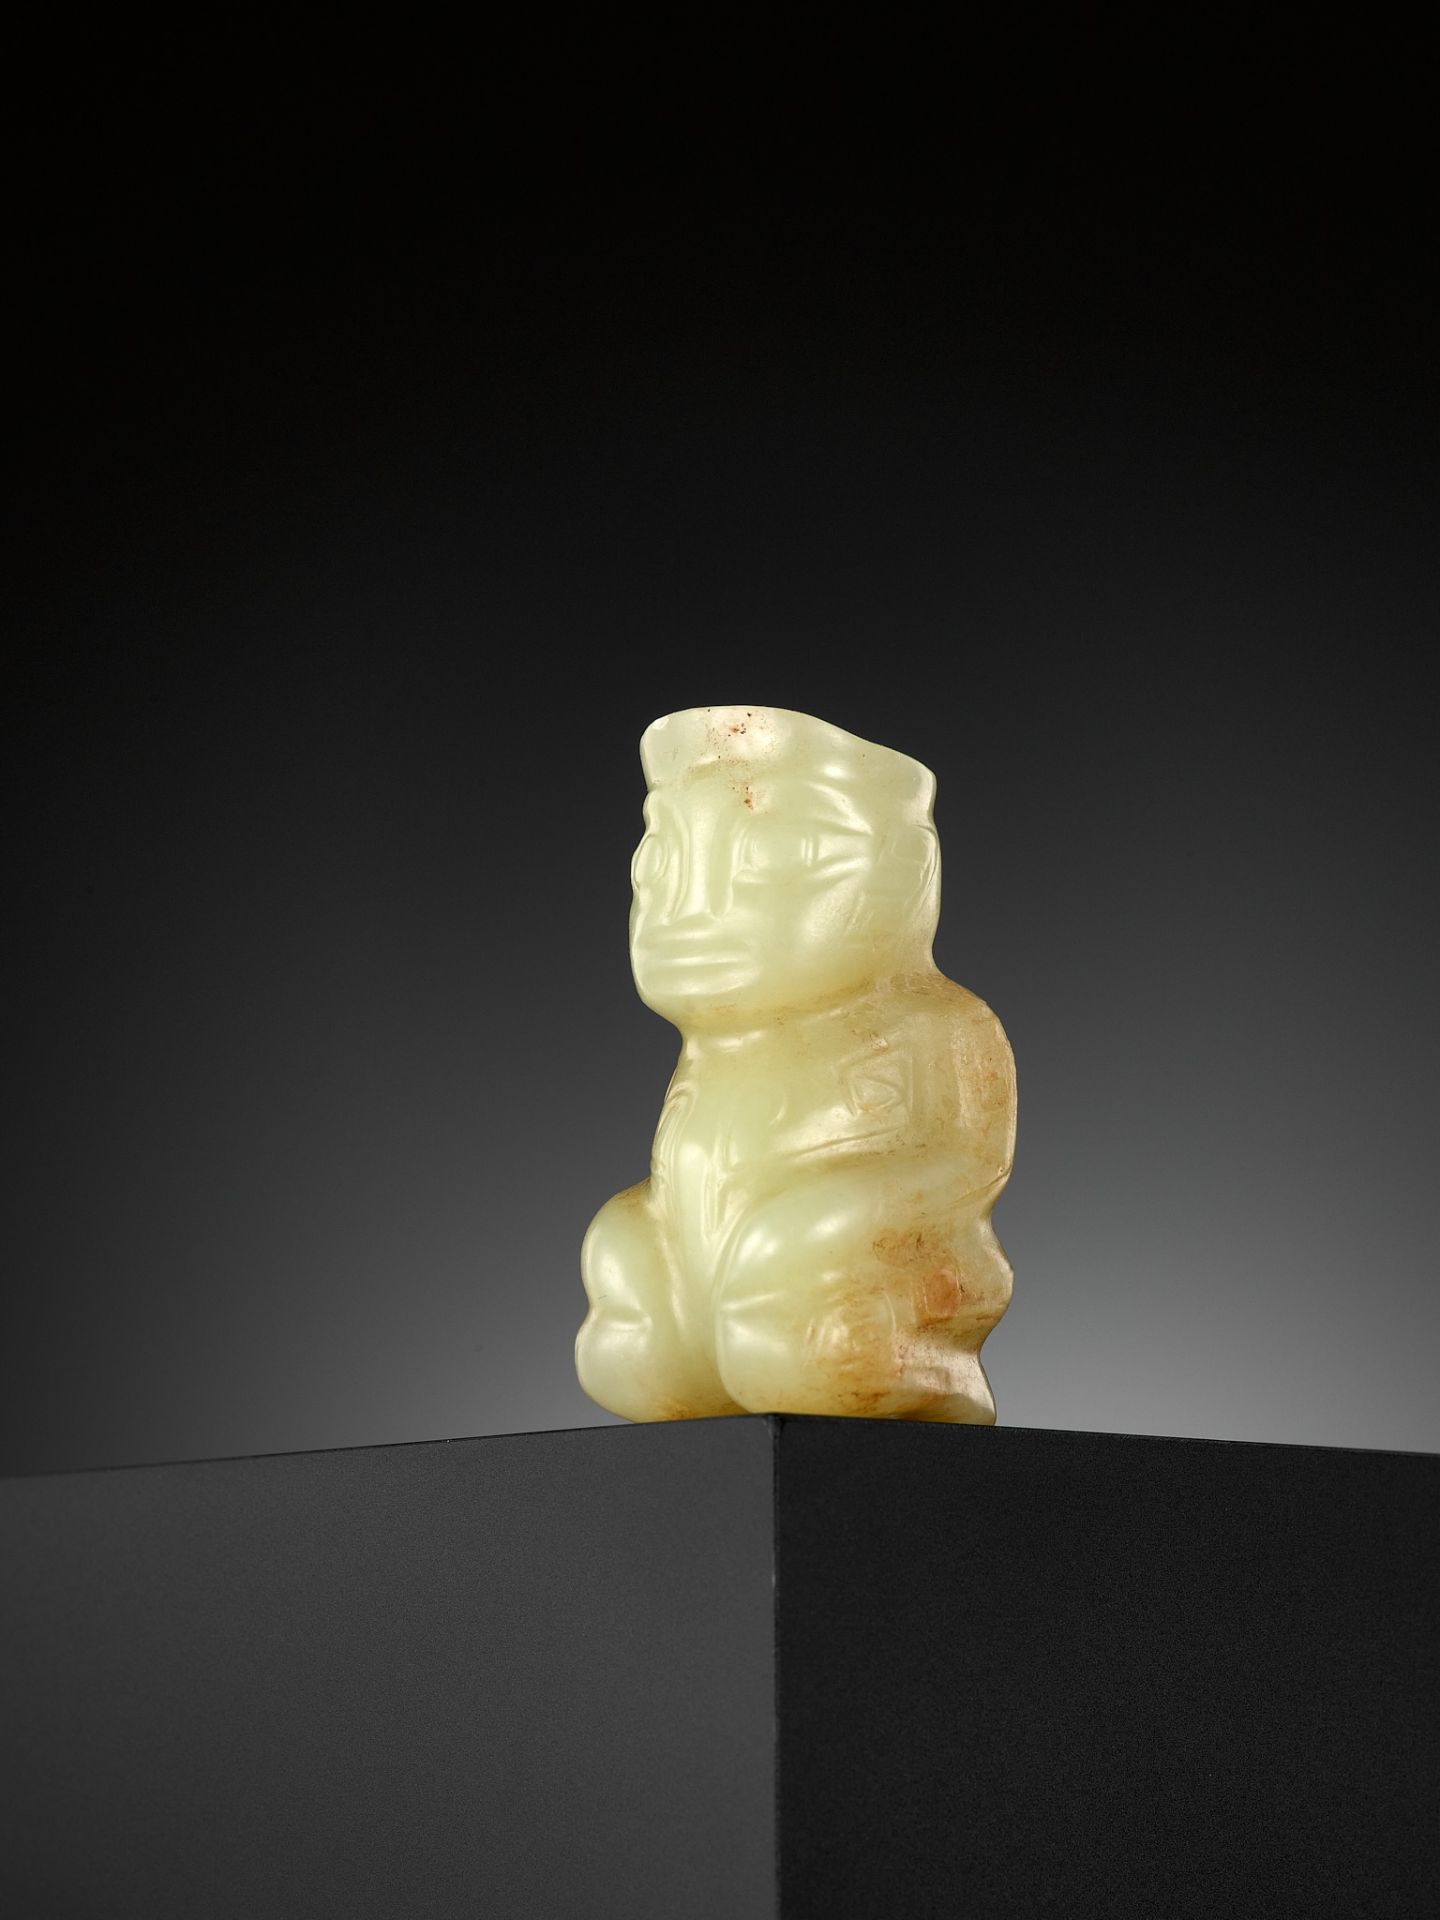 AN EXTREMELY RARE YELLOW JADE 'KNEELING FIGURE', SHANG DYNASTY - Image 17 of 17